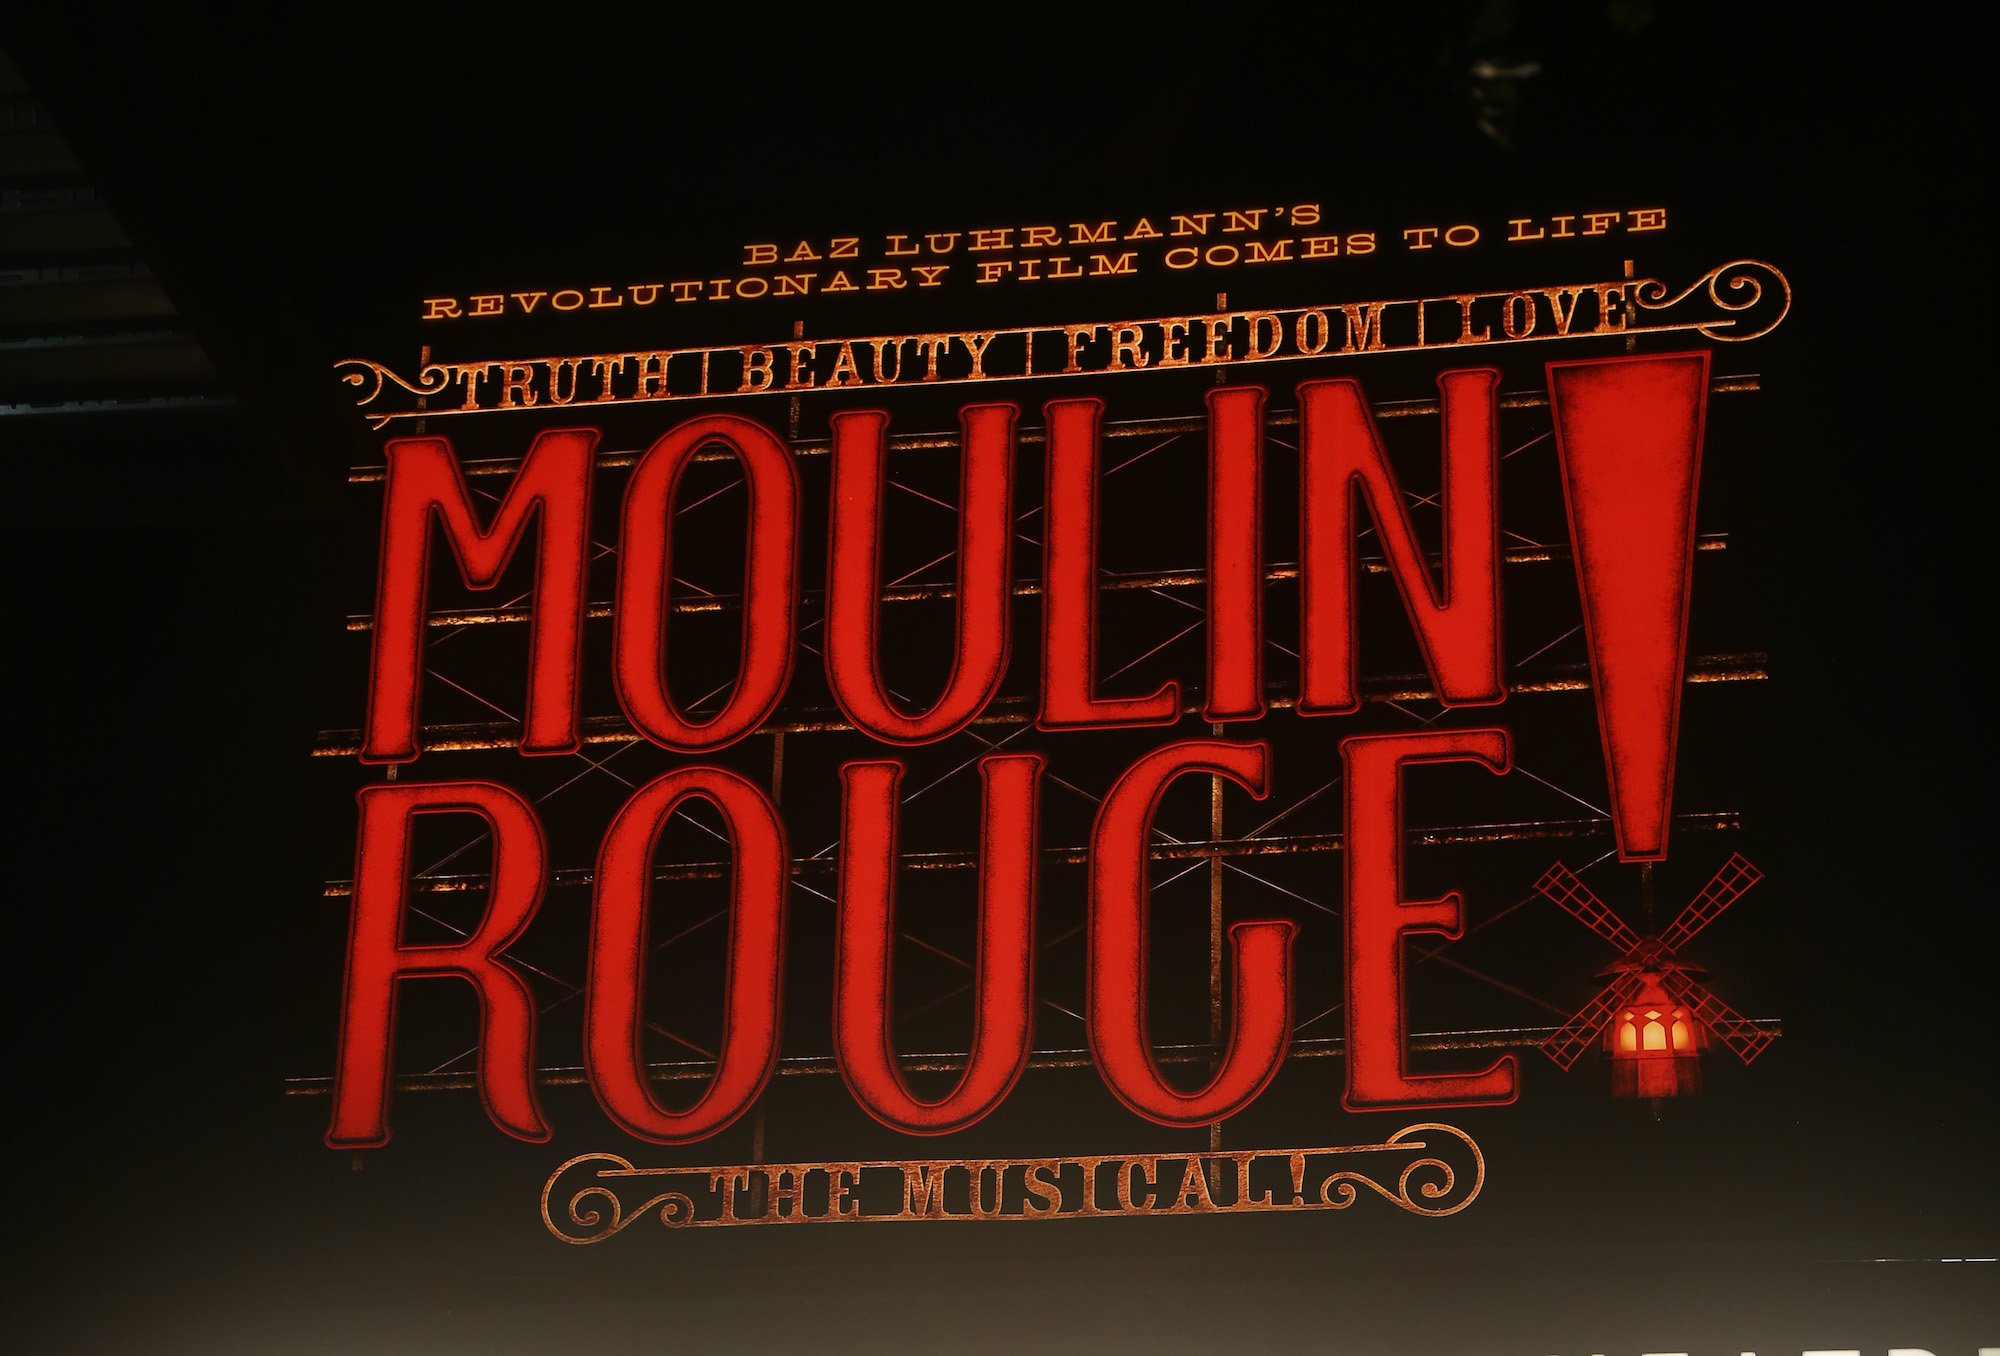 Signage at the re-opening night of 'Moulin Rouge! The Musical' on Broadway on Sept. 24, 2021 in New York City. The sign is large with red lettering that says 'MOULIN ROUGE! The Musical!' 'Truth, Beauty, Freedom, Love,' and 'Baz Luhrmann's revolutionary film comes to life.' 'Moulin Rouge! The Musical' is based on Baz Luhrmann's 2001 'Moulin Rouge!' movie starring Nicole Kidman and Ewan McGregor, but the musical is different from the movie. The musical is up for several Tony Awards at the 2021 Tony Awards, broadcasting live on Sept. 26.